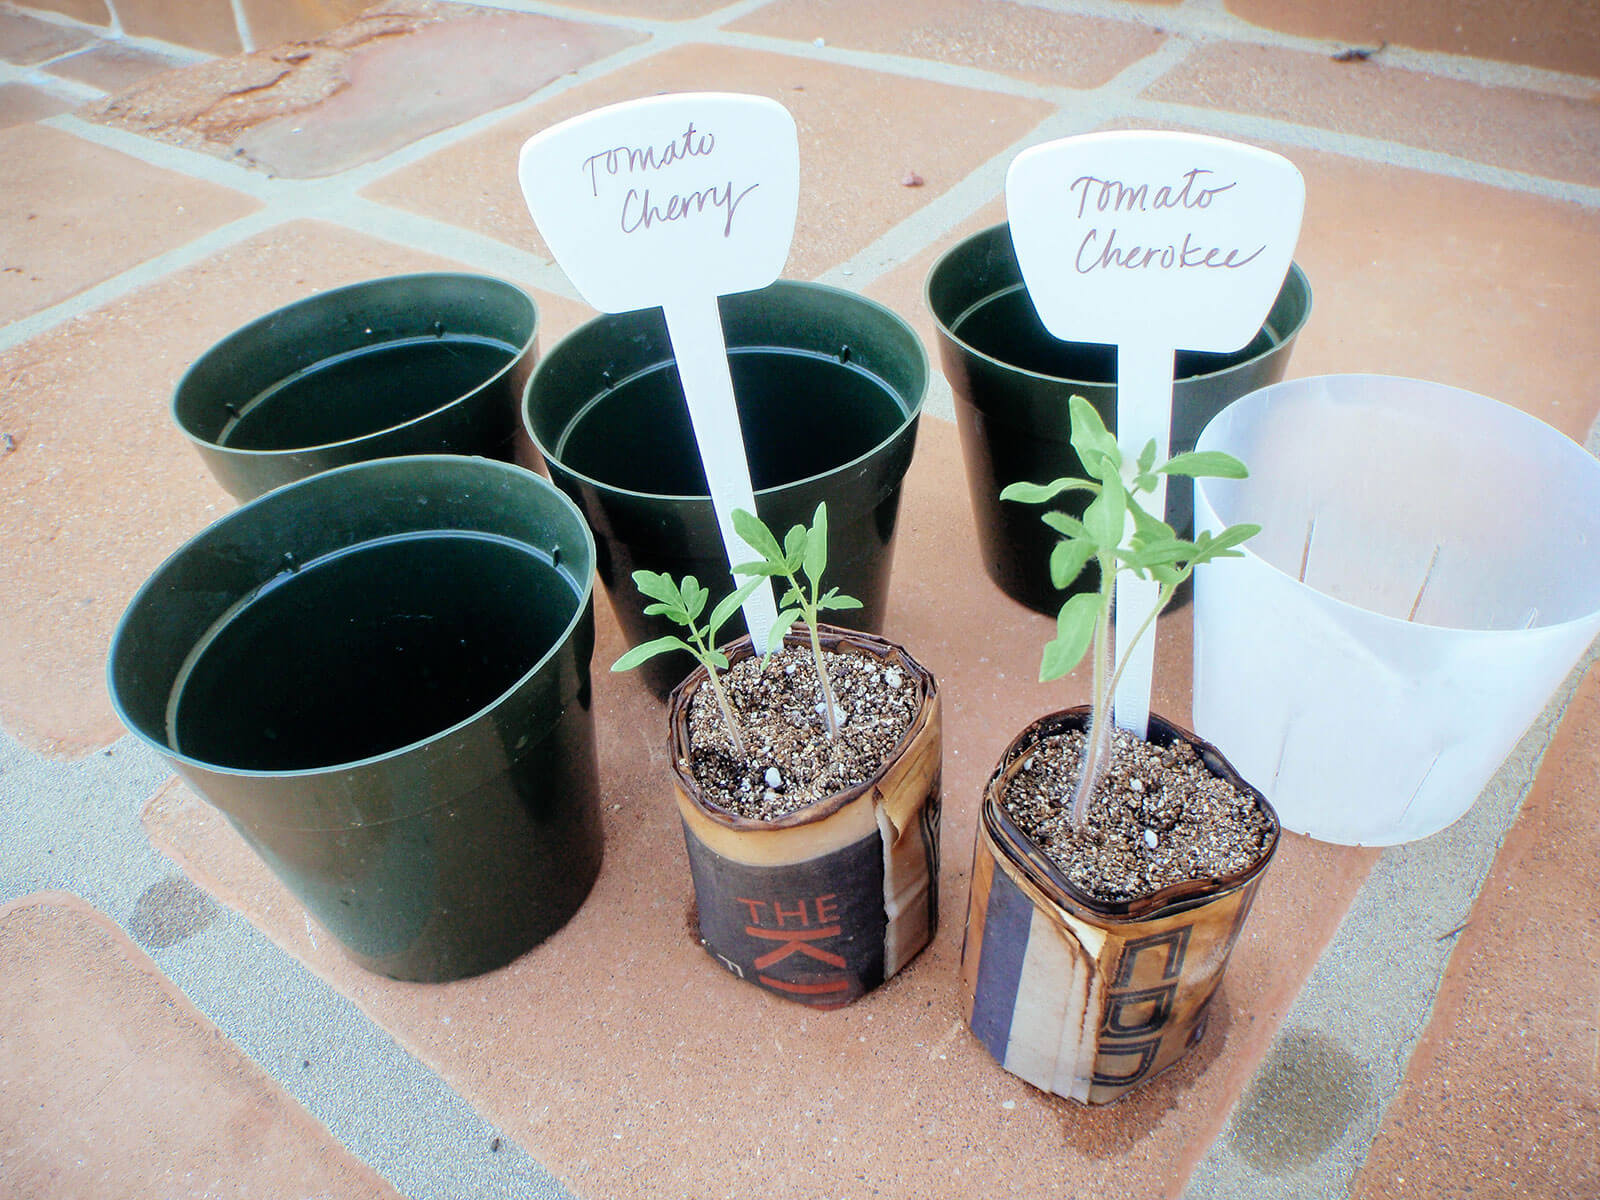 Gather clean 4-inch pots and high-quality potting soil to repot tomato seedlings